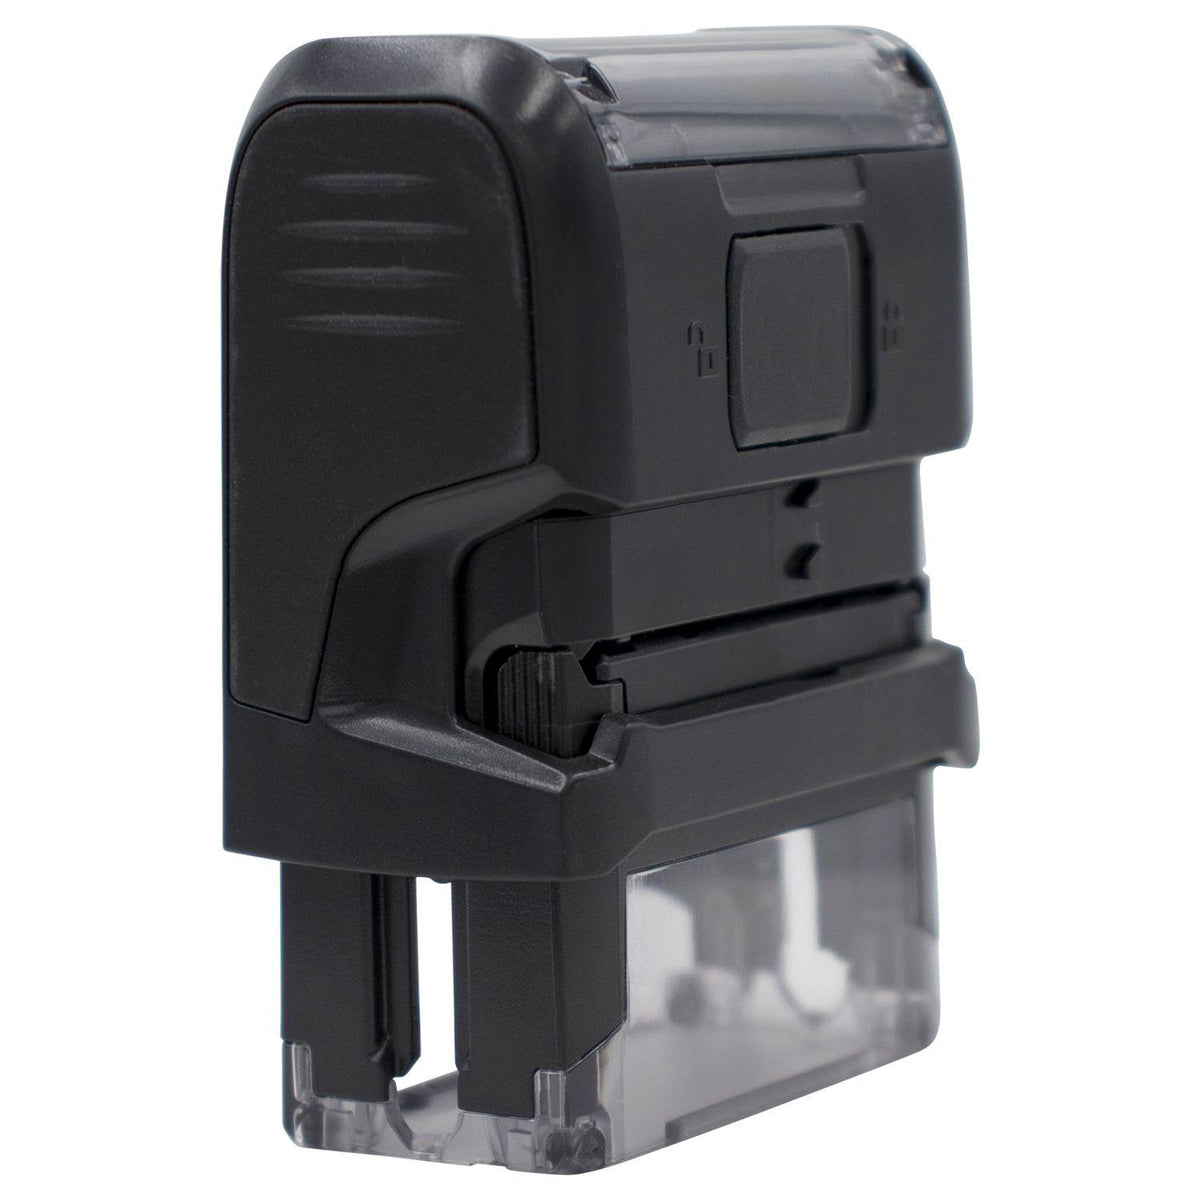 Self-Inking Confidential with Logo Stamp - Engineer Seal Stamps - Brand_Trodat, Impression Size_Small, Stamp Type_Self-Inking Stamp, Type of Use_Business, Type of Use_Legal, Type of Use_Office